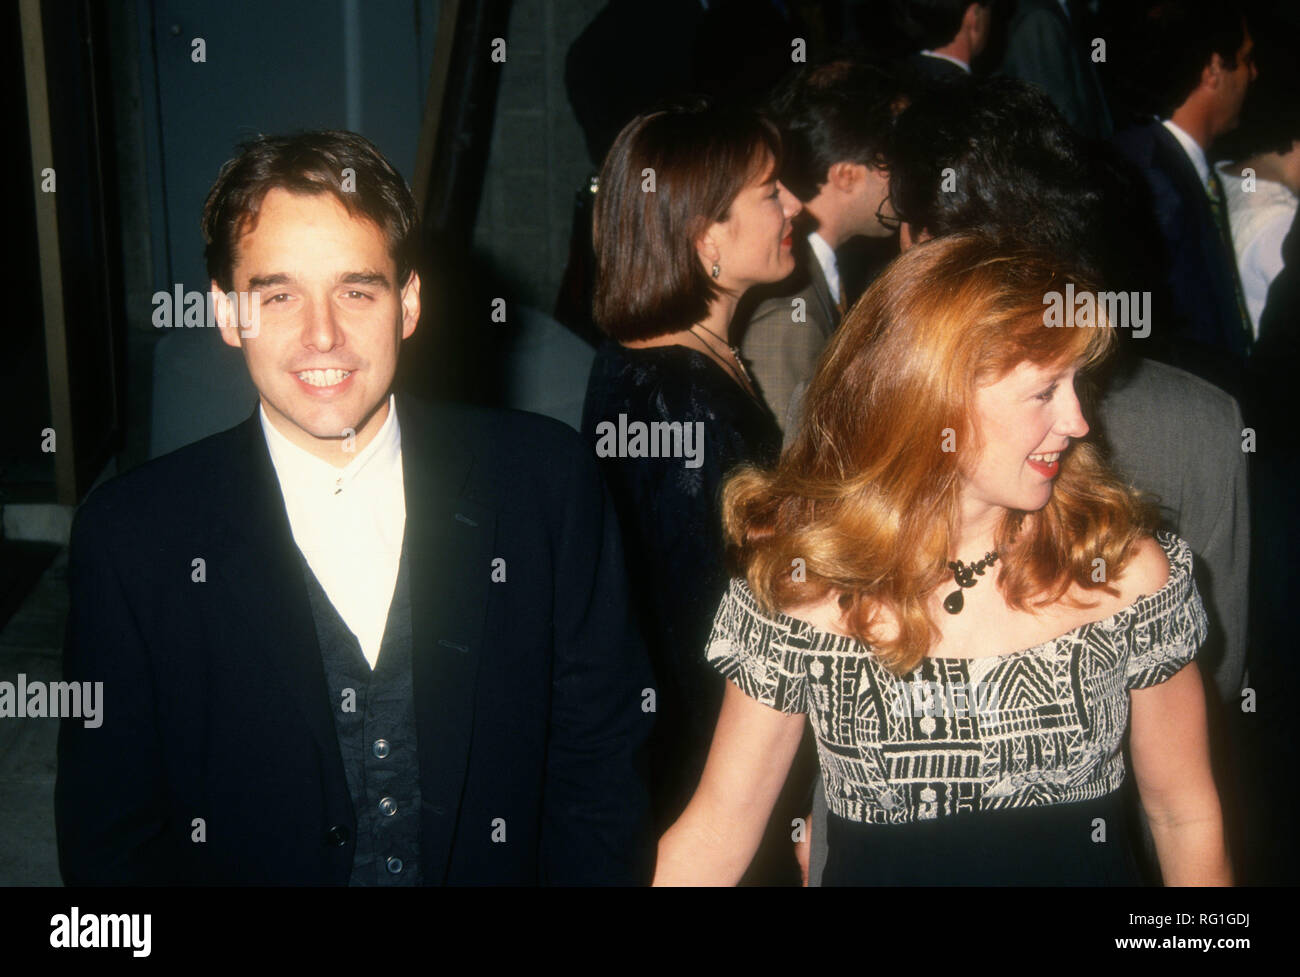 BEVERLY HILLS, CA - NOVEMBER 22: Actor Joseph Narducci attends 20th Century Fox's' 'Mrs. Doubtfire' Premiere on November 22, 1993 at The Academy of Motion Picture Arts & Sciences in Beverly Hills, California. Photo by Barry King/Alamy Stock Photo Stock Photo